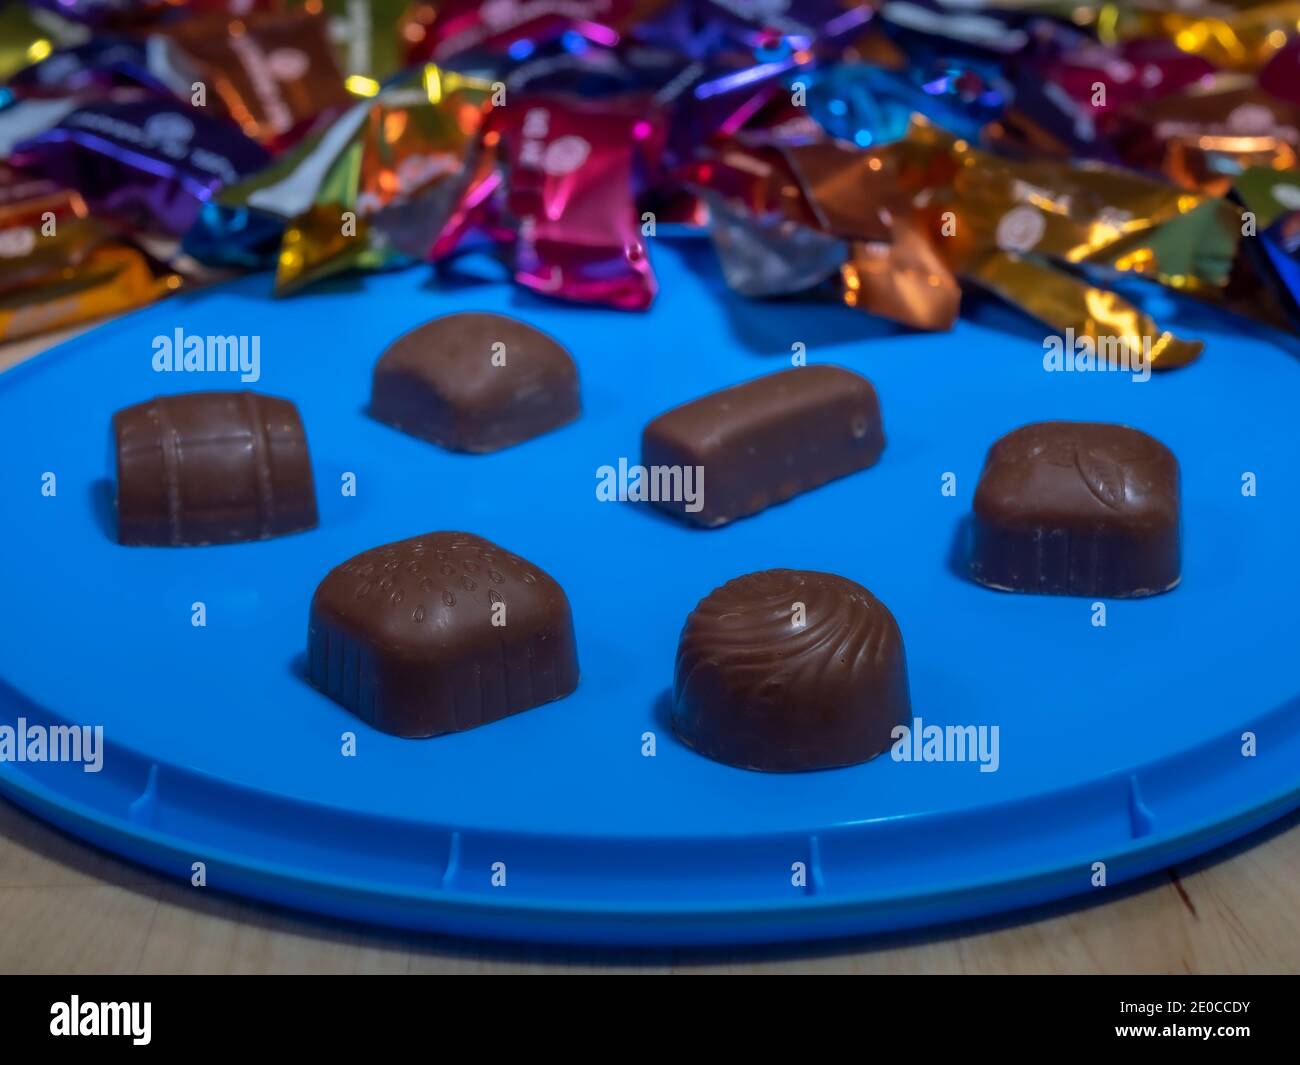 Closeup of filled, coated milk chocolates, with out of focus colourful wrappers in the background, and some in focus opened chocolates on the box lid. Stock Photo